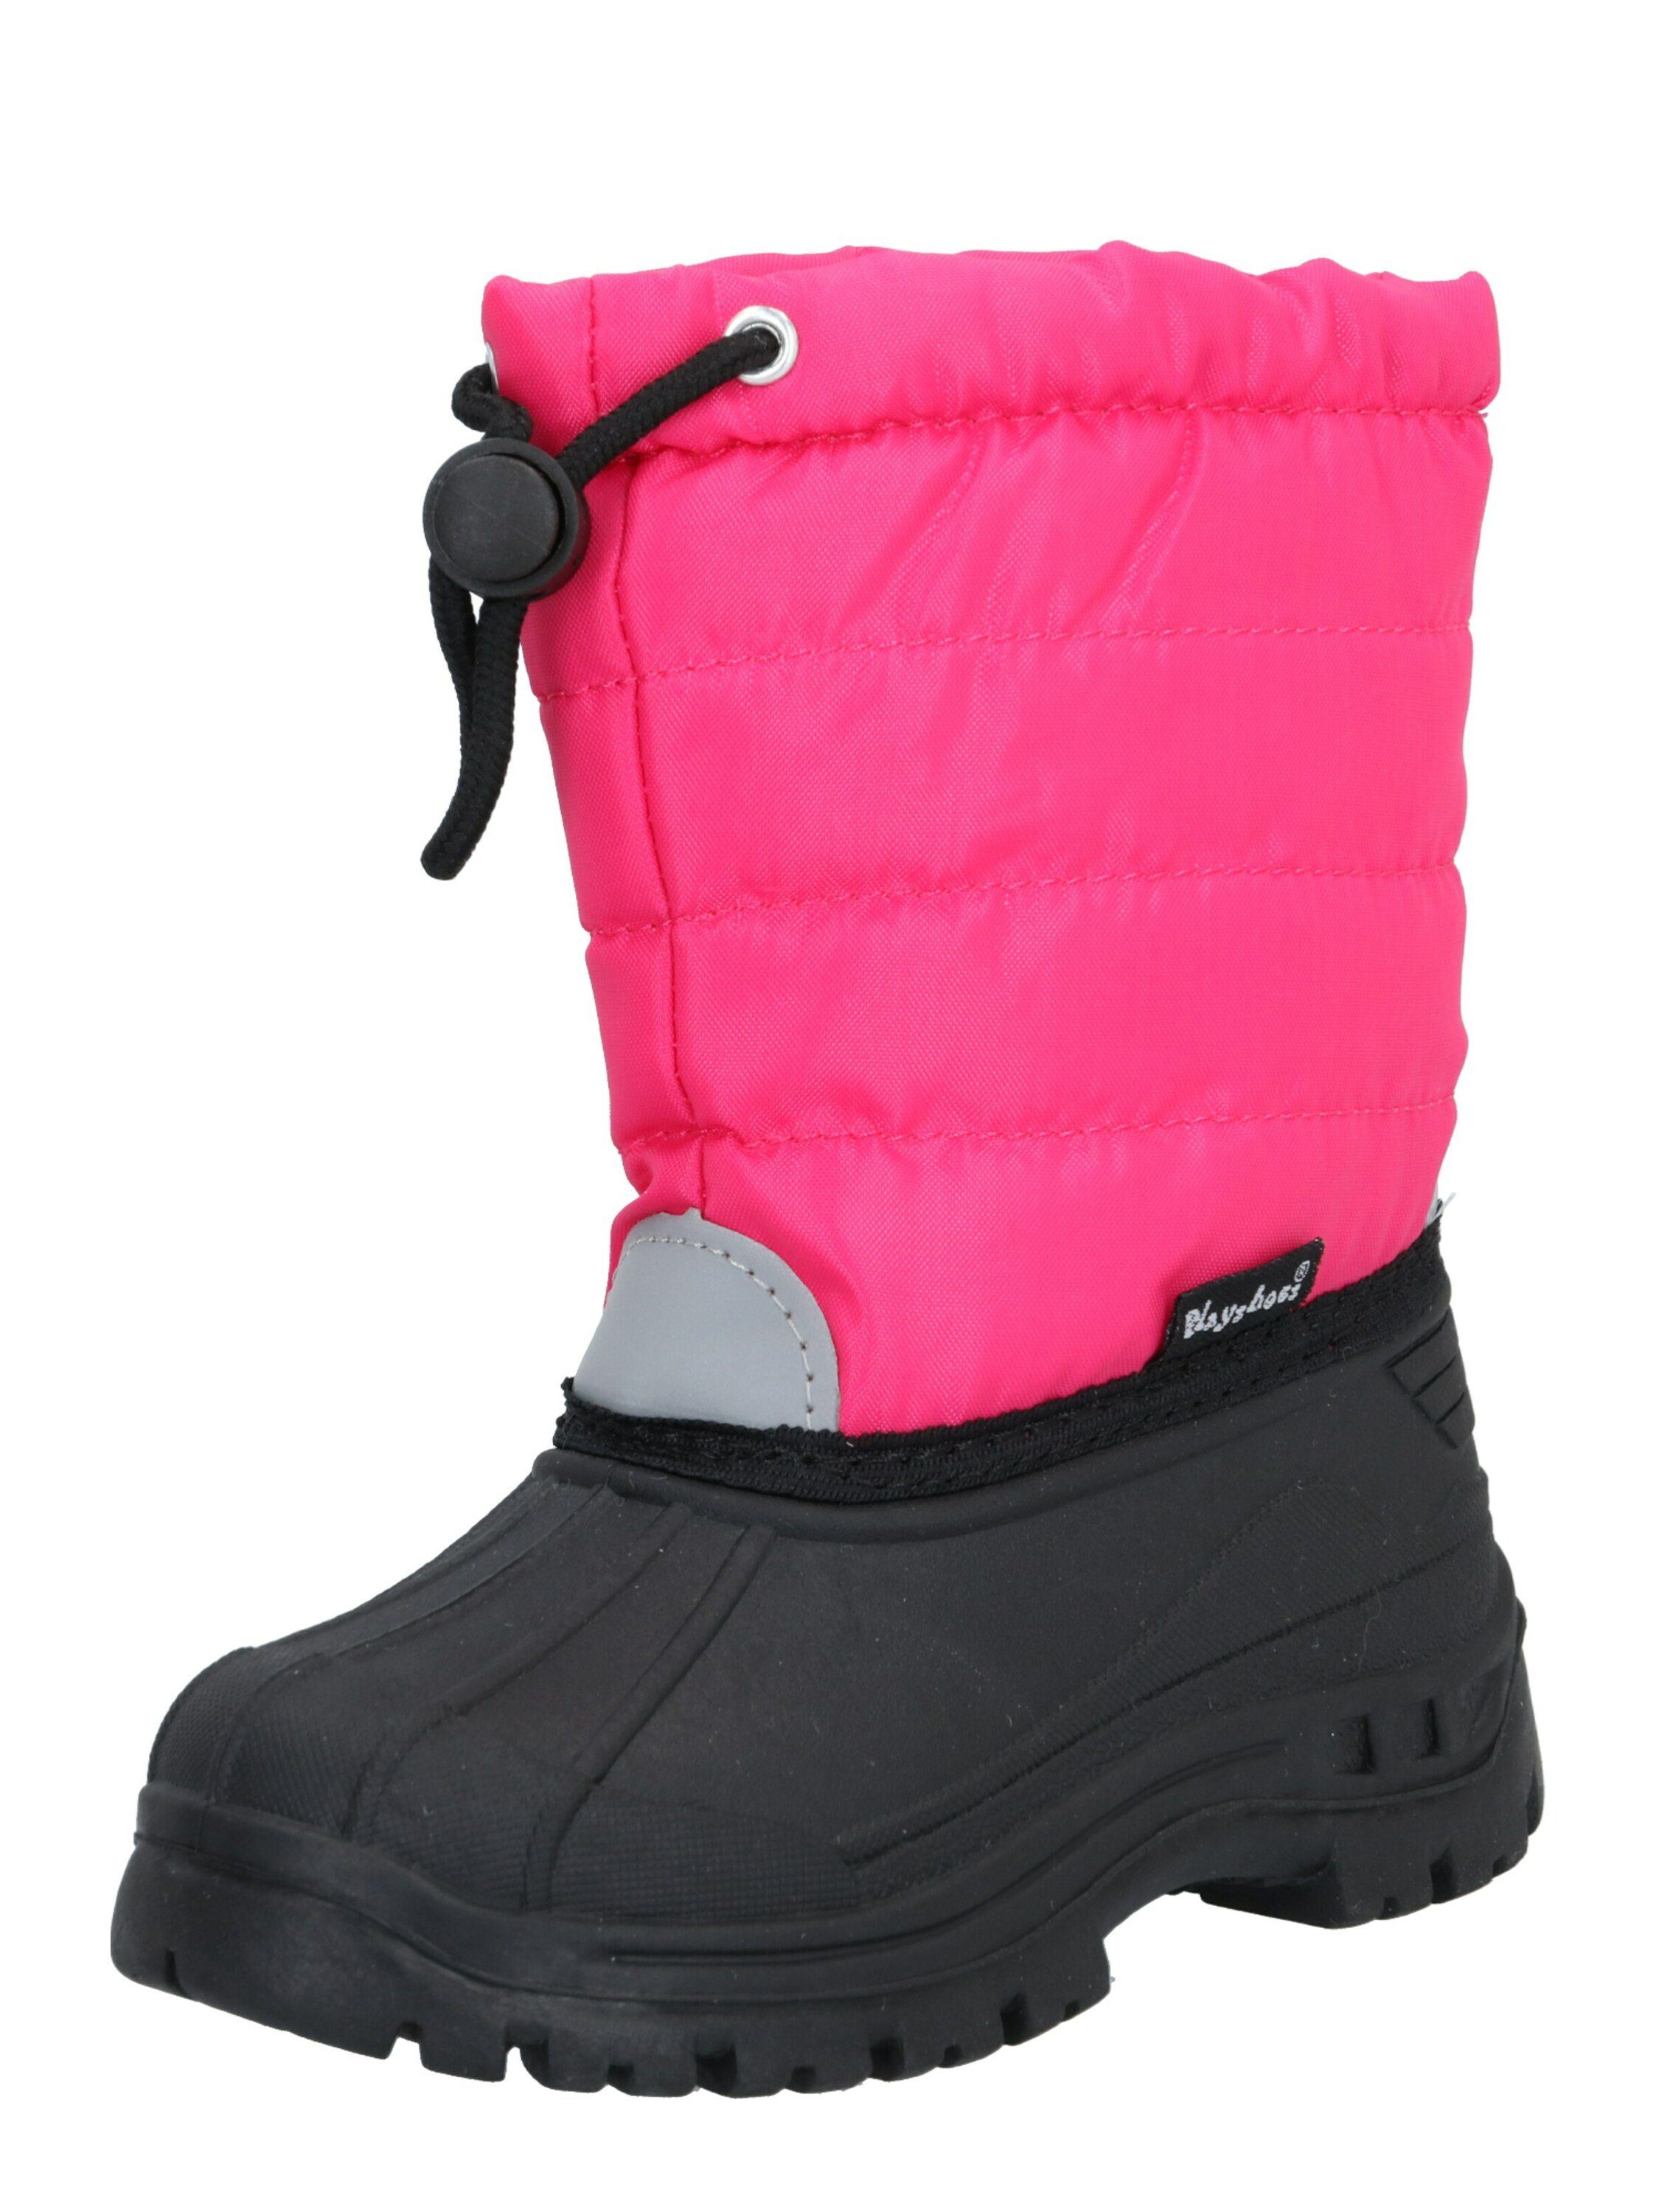 Playshoes pink (1-tlg) Stiefel